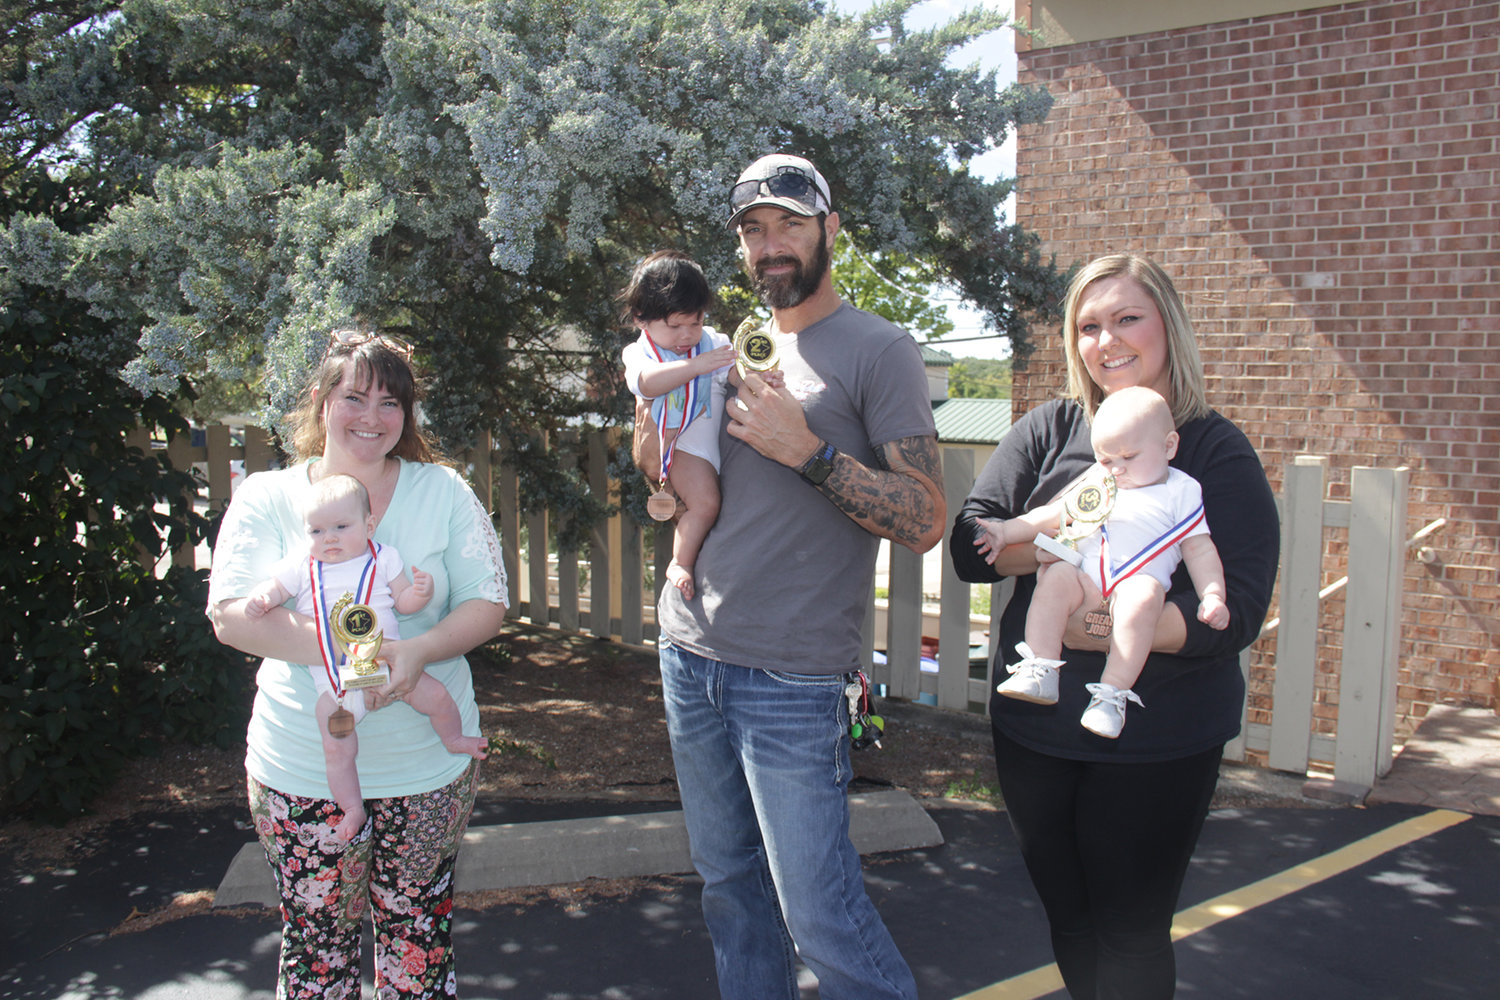 BABY CONTEST 0-6 MONTHS — First place: Rory Philbin, held by Kayla Philbin; Second place: Adalynn Burke, held by Chris Burke; Third place: Stella Johler, held by Ashleigh Reece.